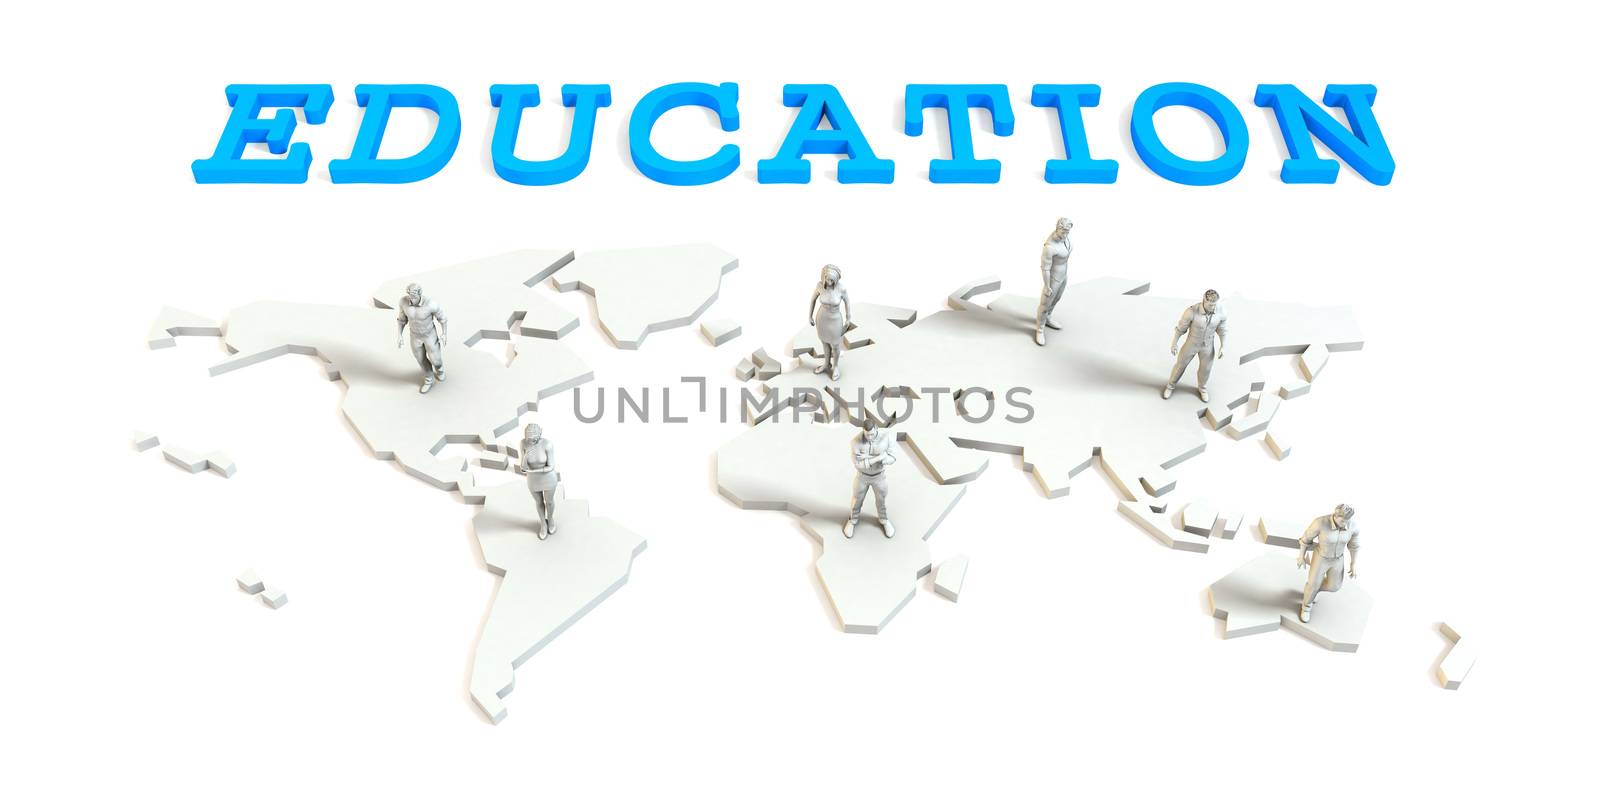 Education Global Business Abstract with People Standing on Map